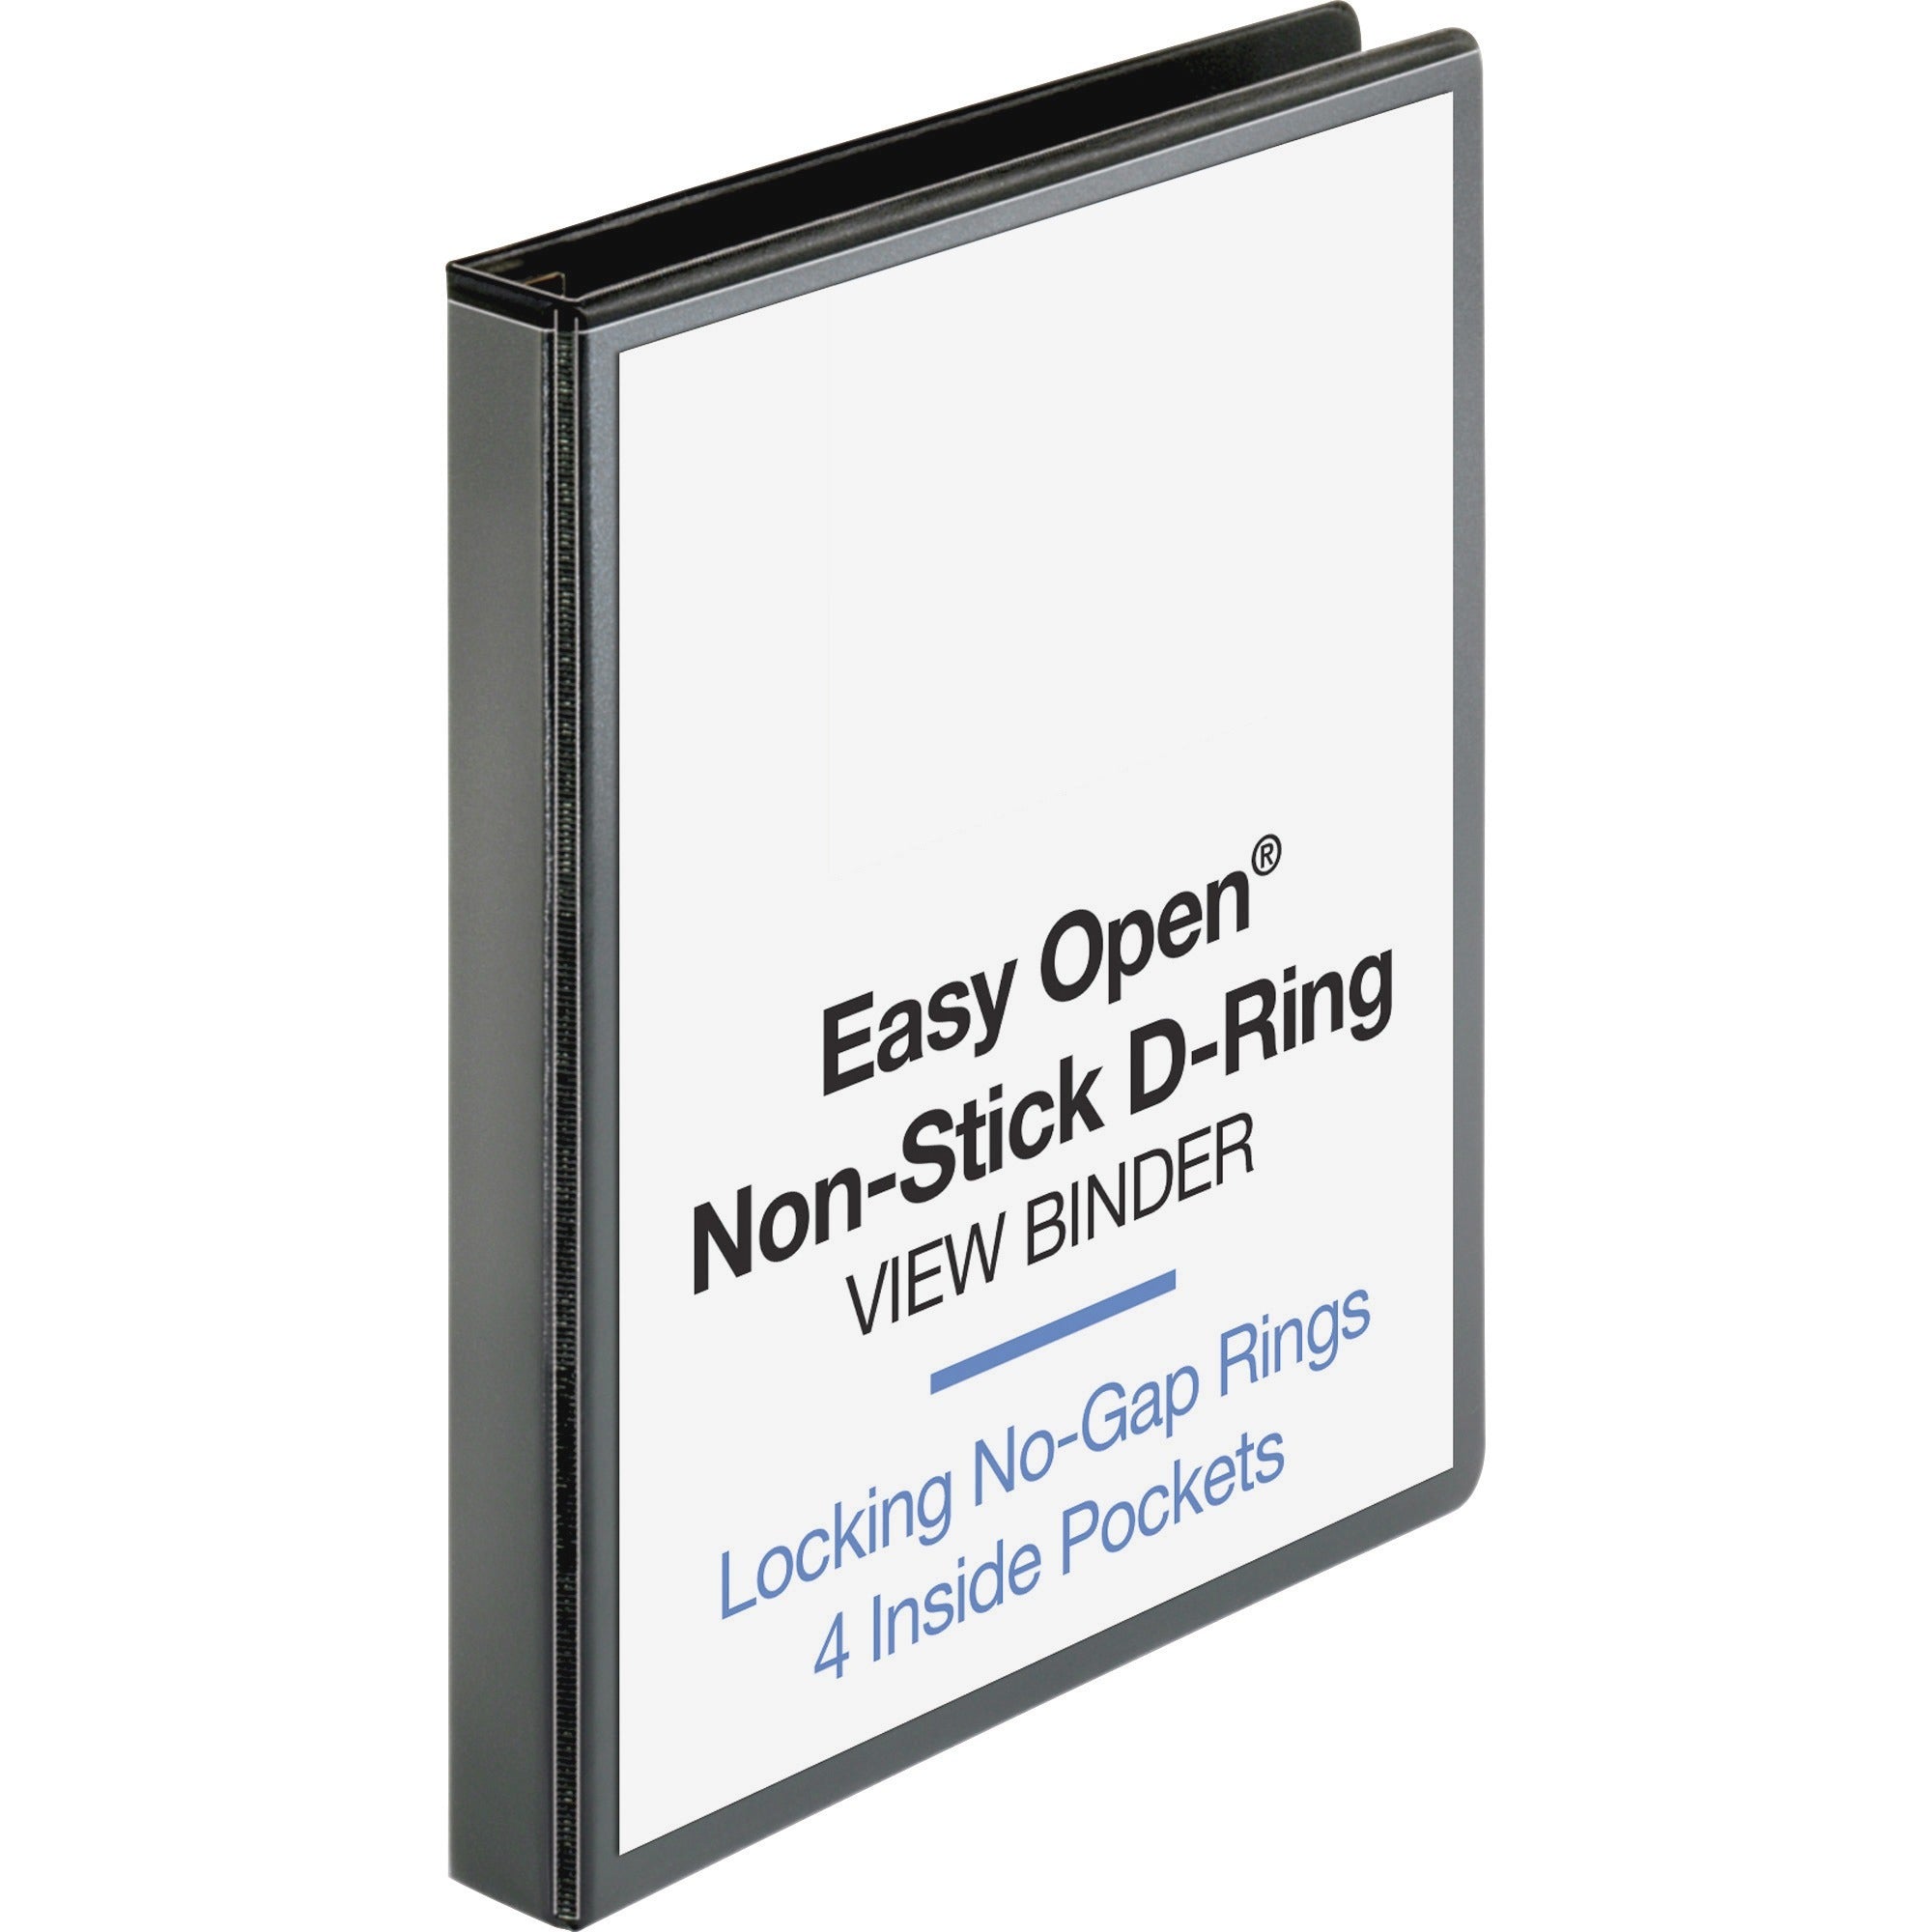 business-source-locking-d-ring-view-binder-1-binder-capacity-letter-8-1-2-x-11-sheet-size-200-sheet-capacity-d-ring-fasteners-4-inside-front-&-back-pockets-polypropylene-chipboard-black-recycled-locking-ring-clear-overlay_bsn26956 - 1